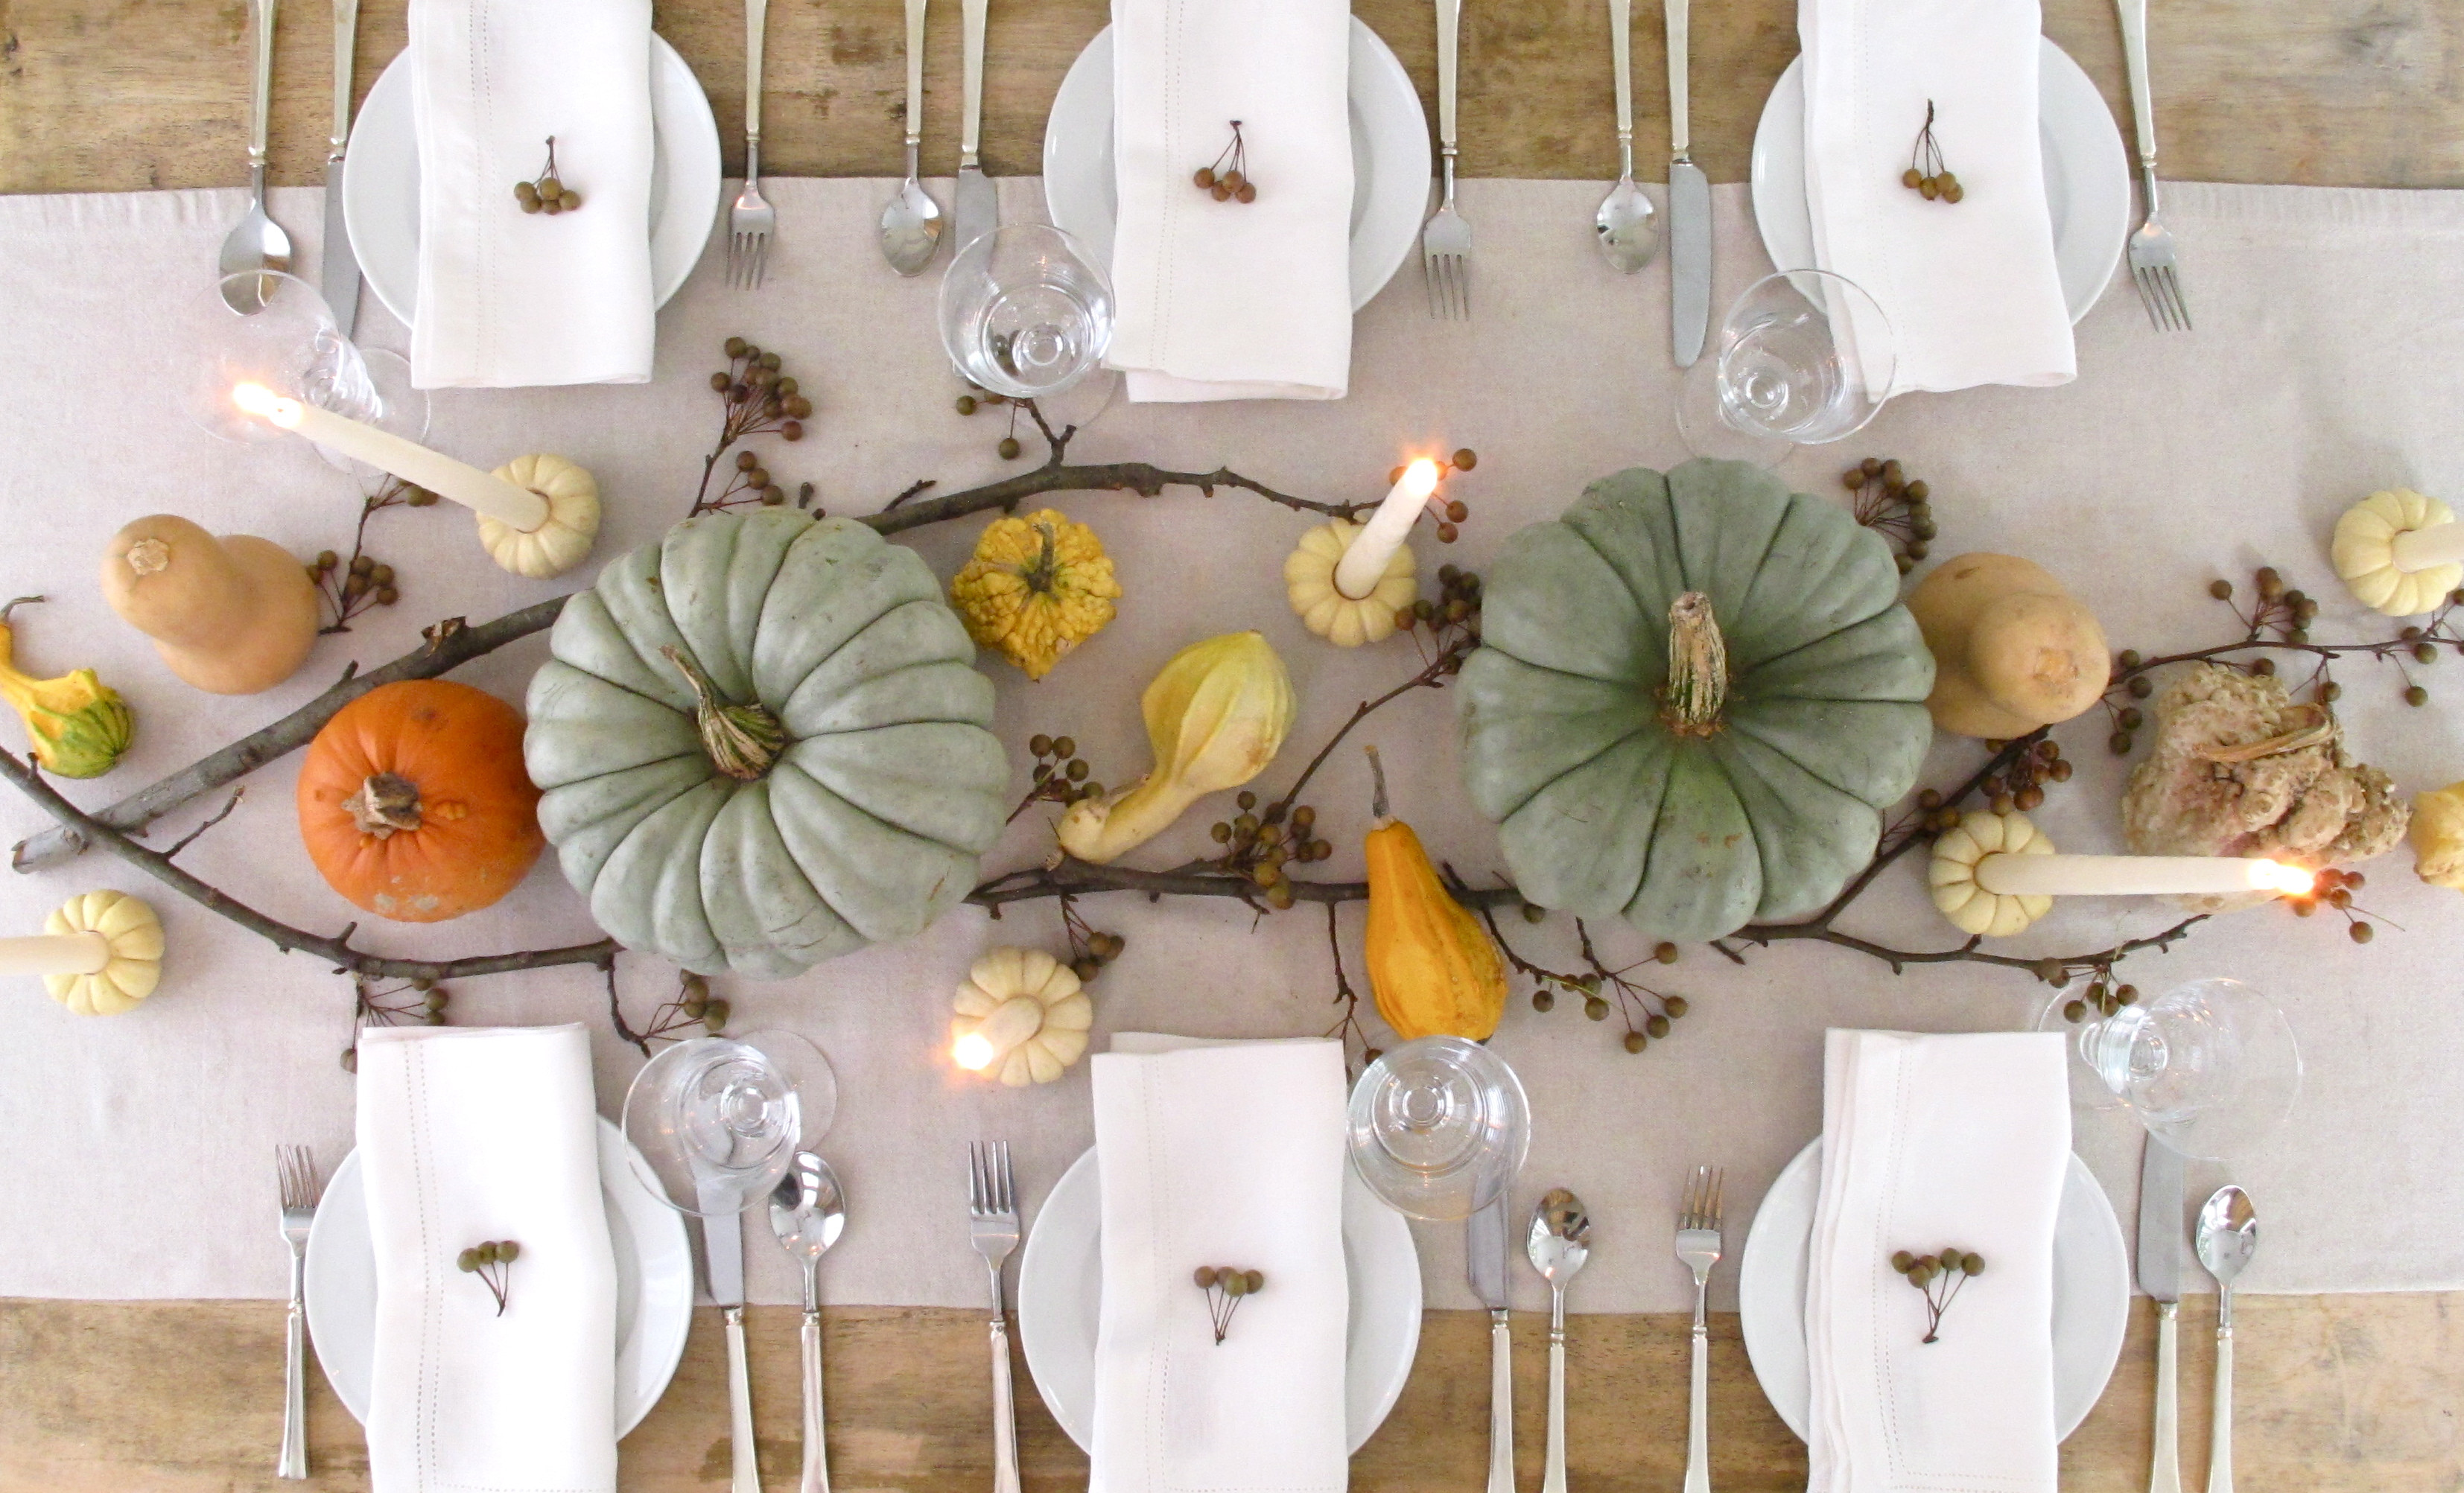 Thanksgiving Table Decor
 Our favorite Thanksgiving Day table settings TODAY